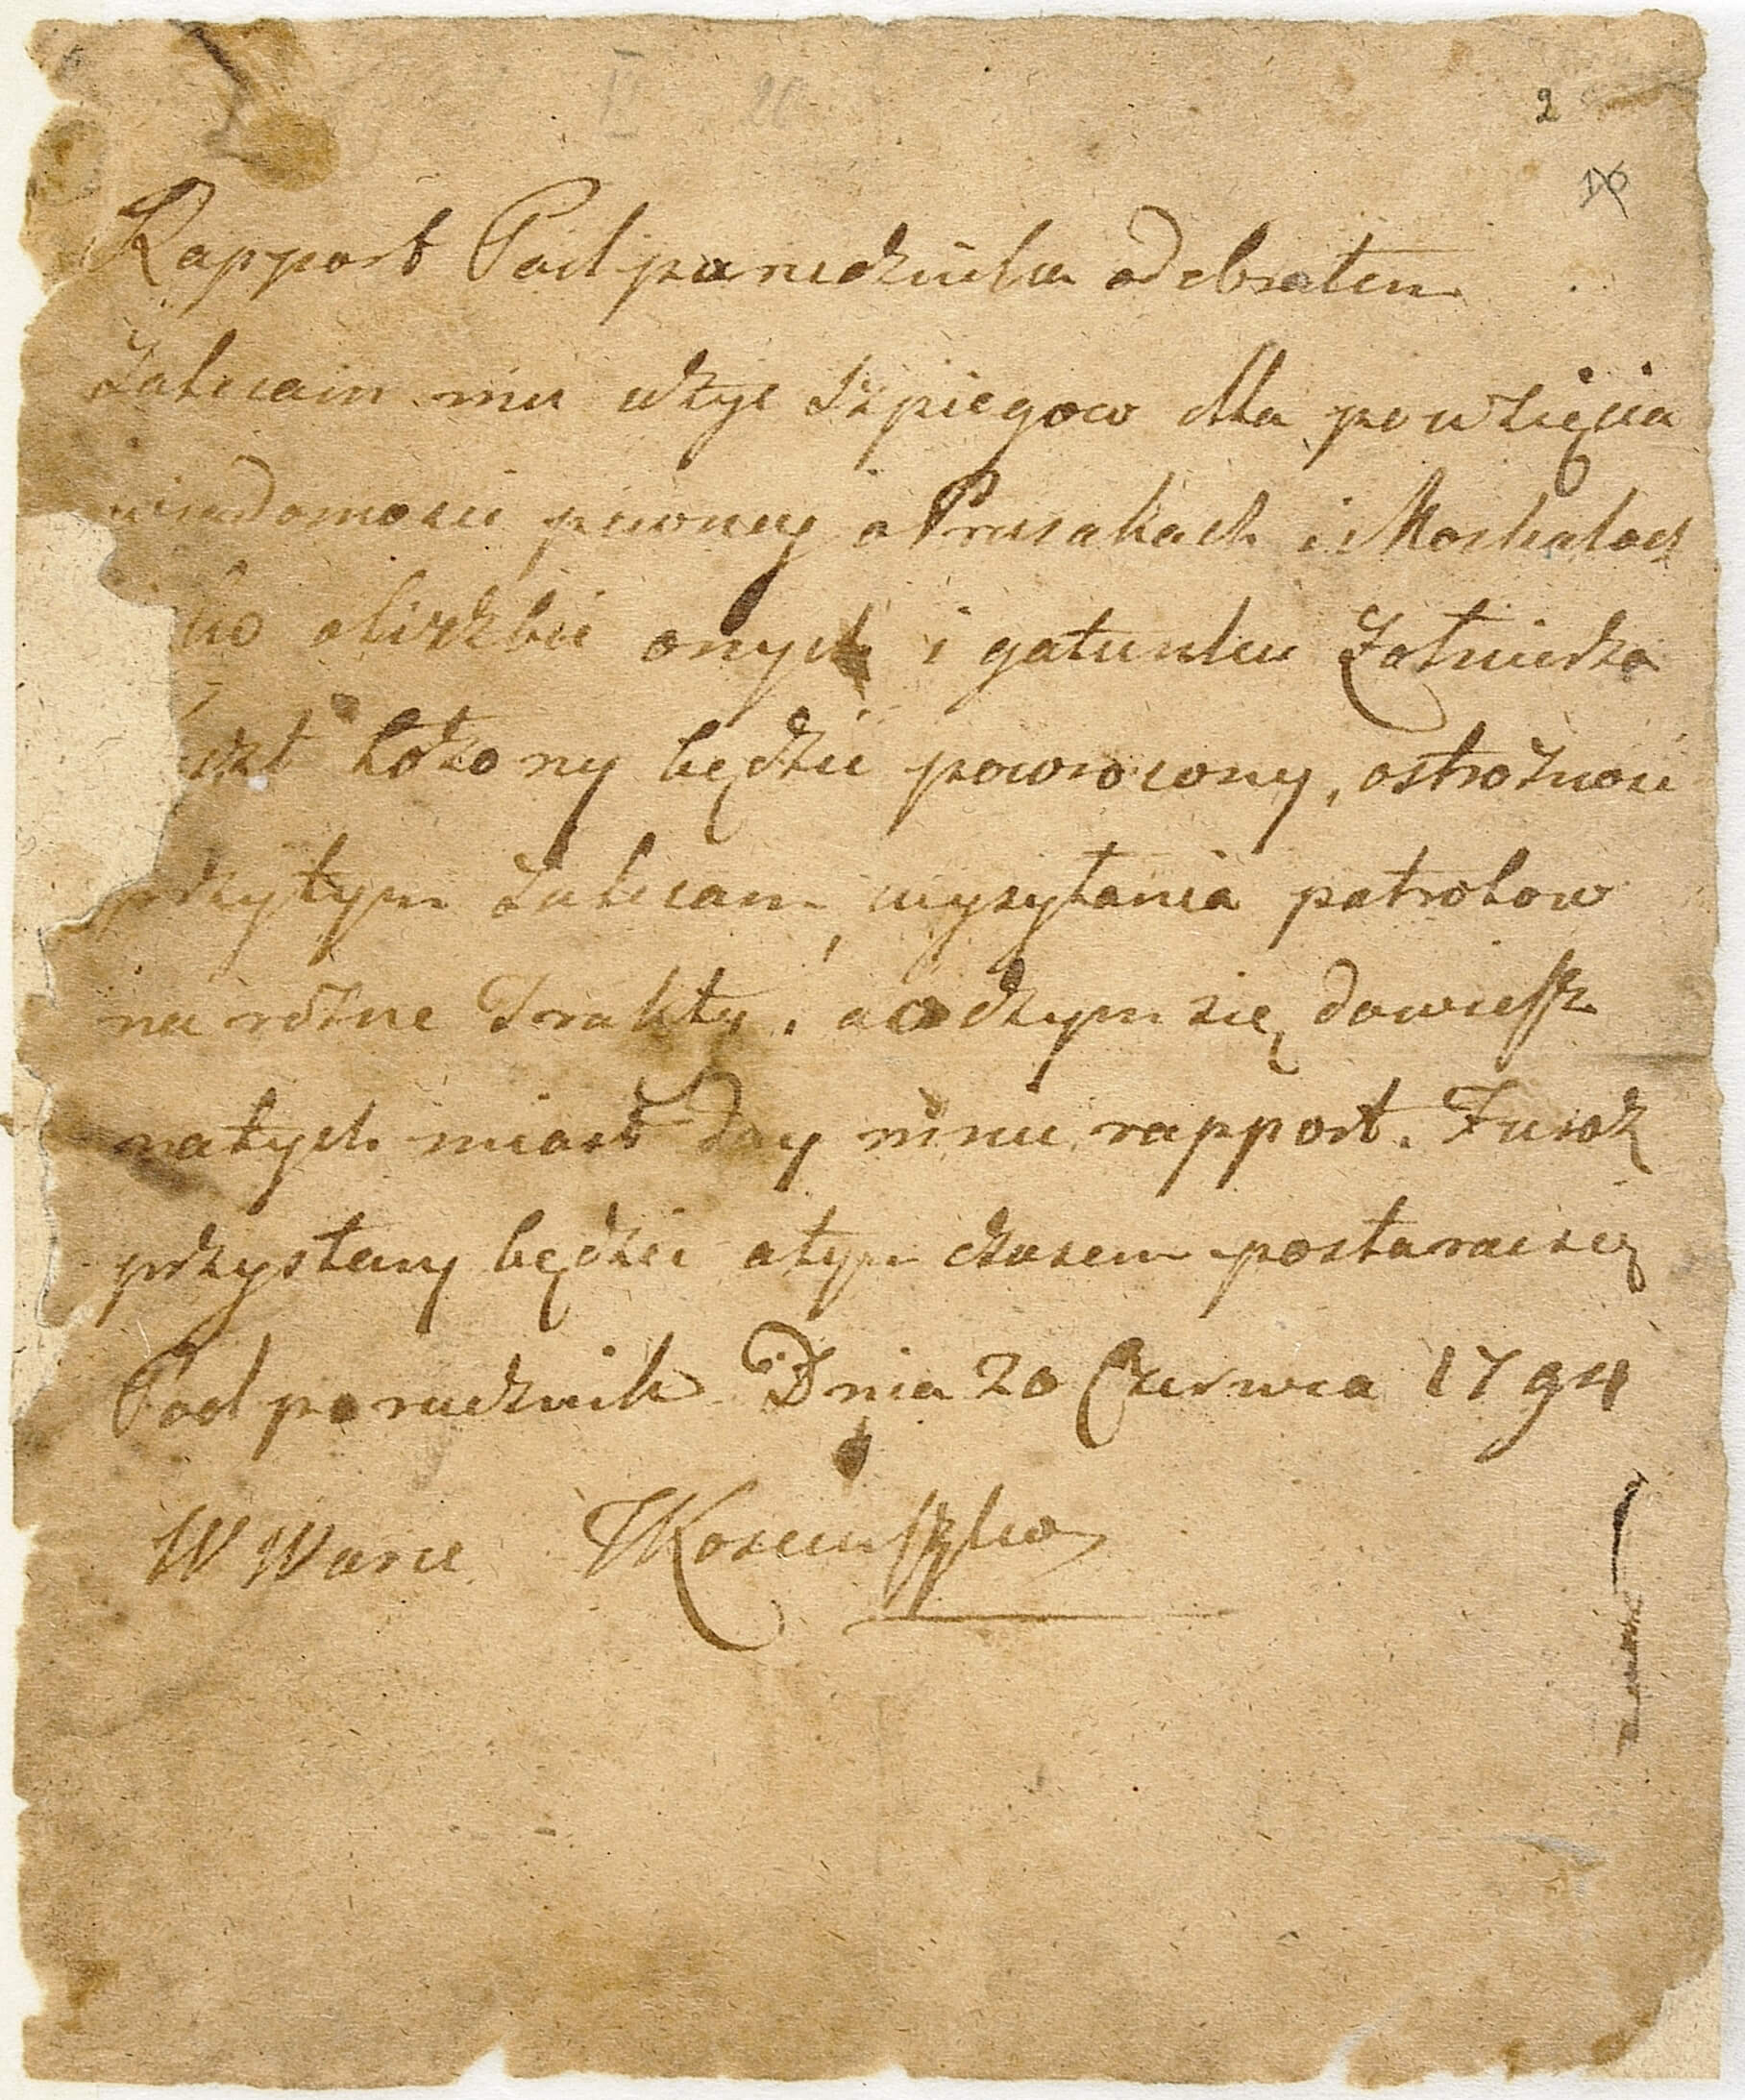 Order by Tadeusz Kościuszko issued in Warka, June 20, 1794, courtesy of the National Library